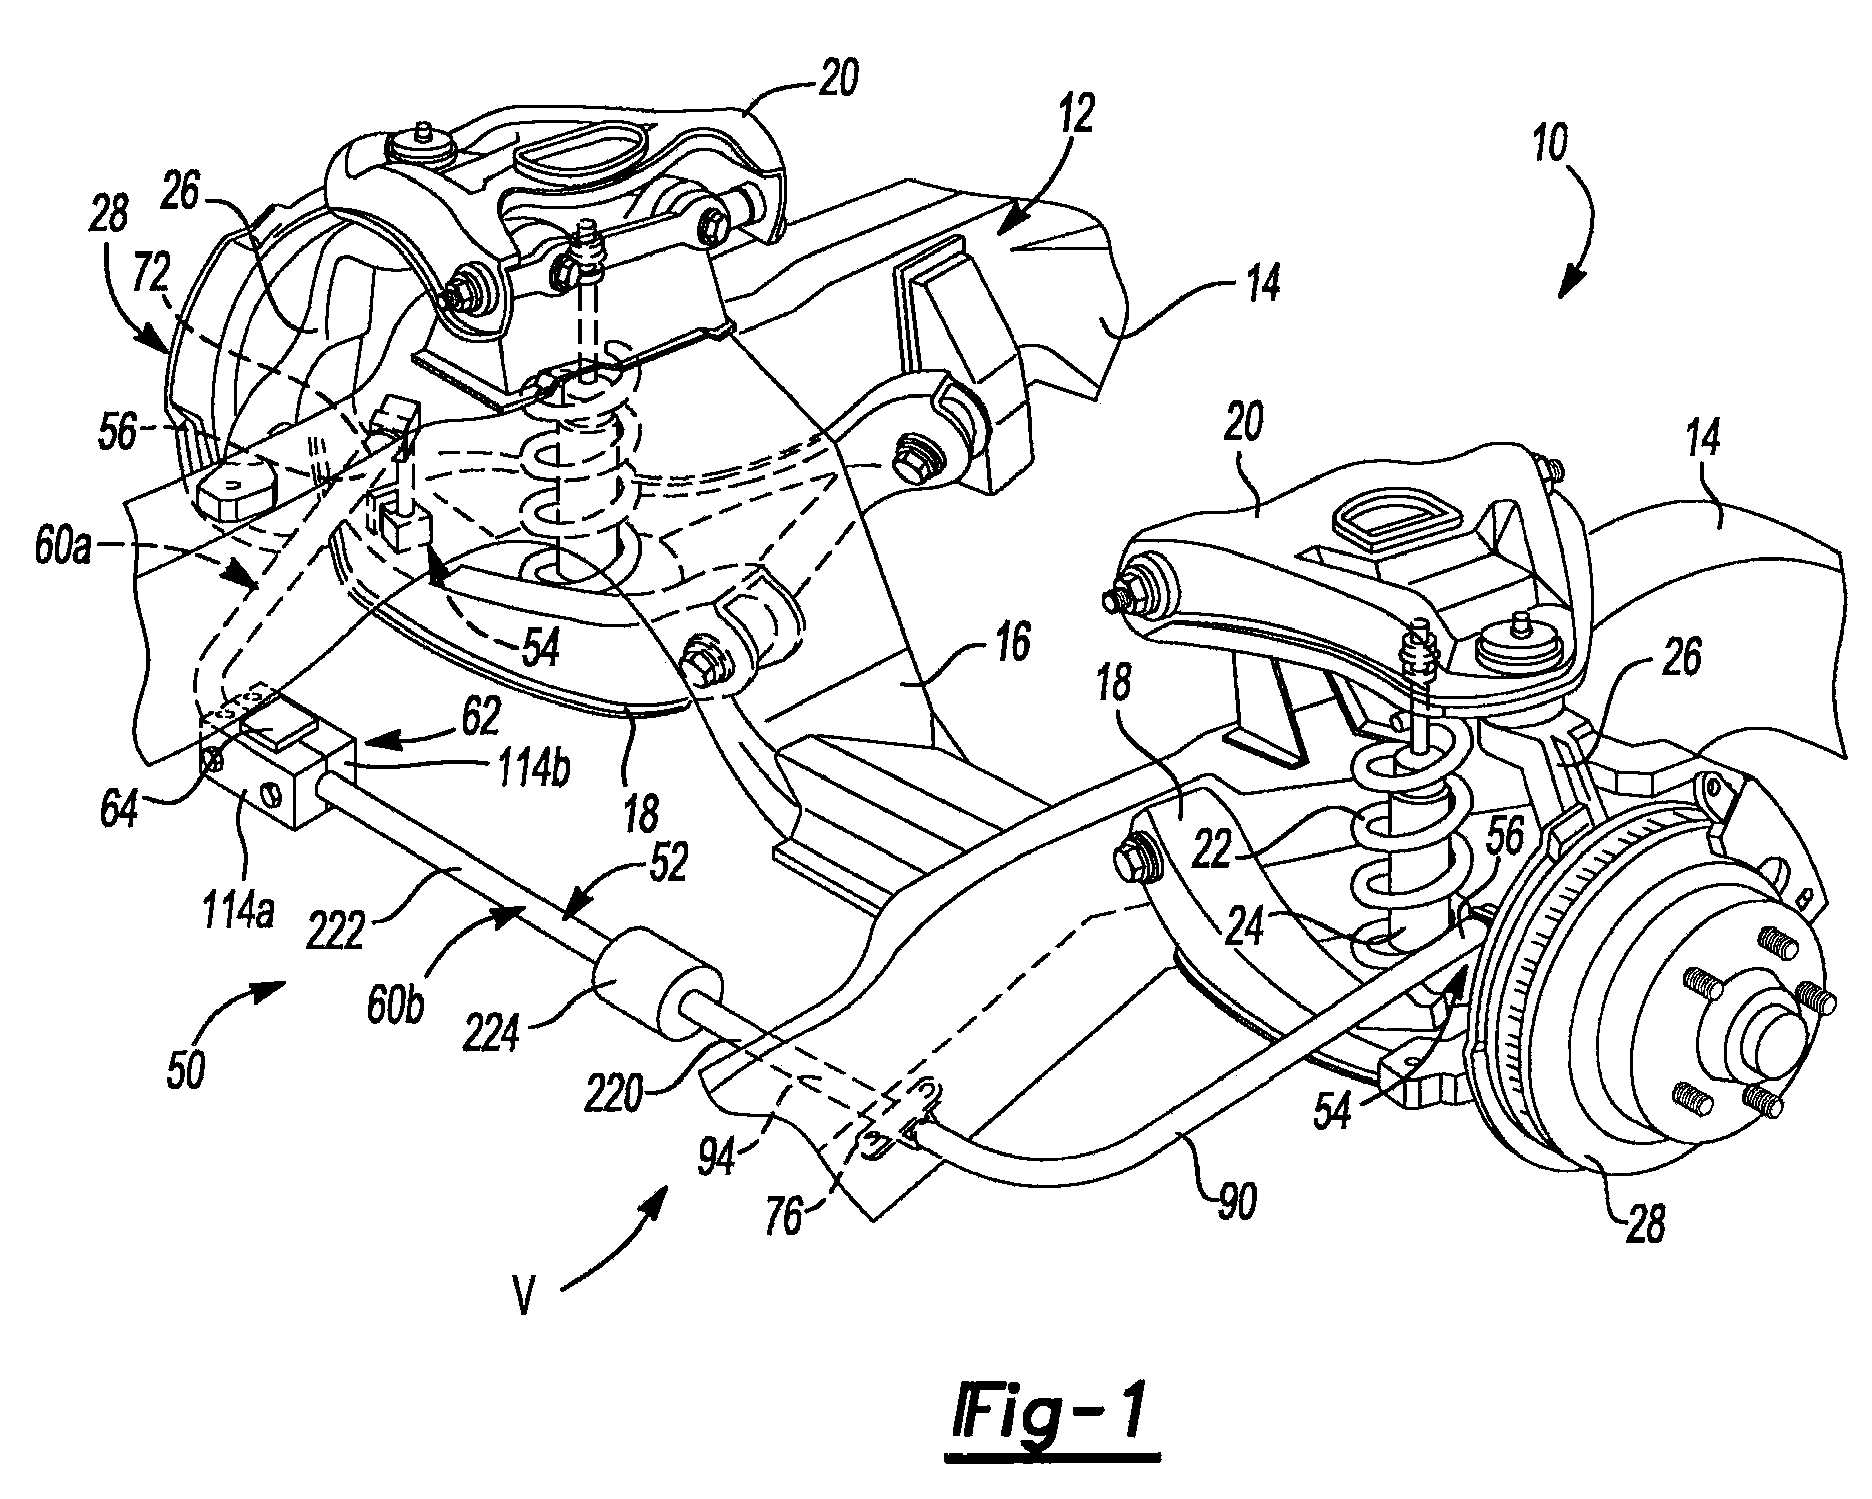 Actuator for disconnectable stabilizer bar system